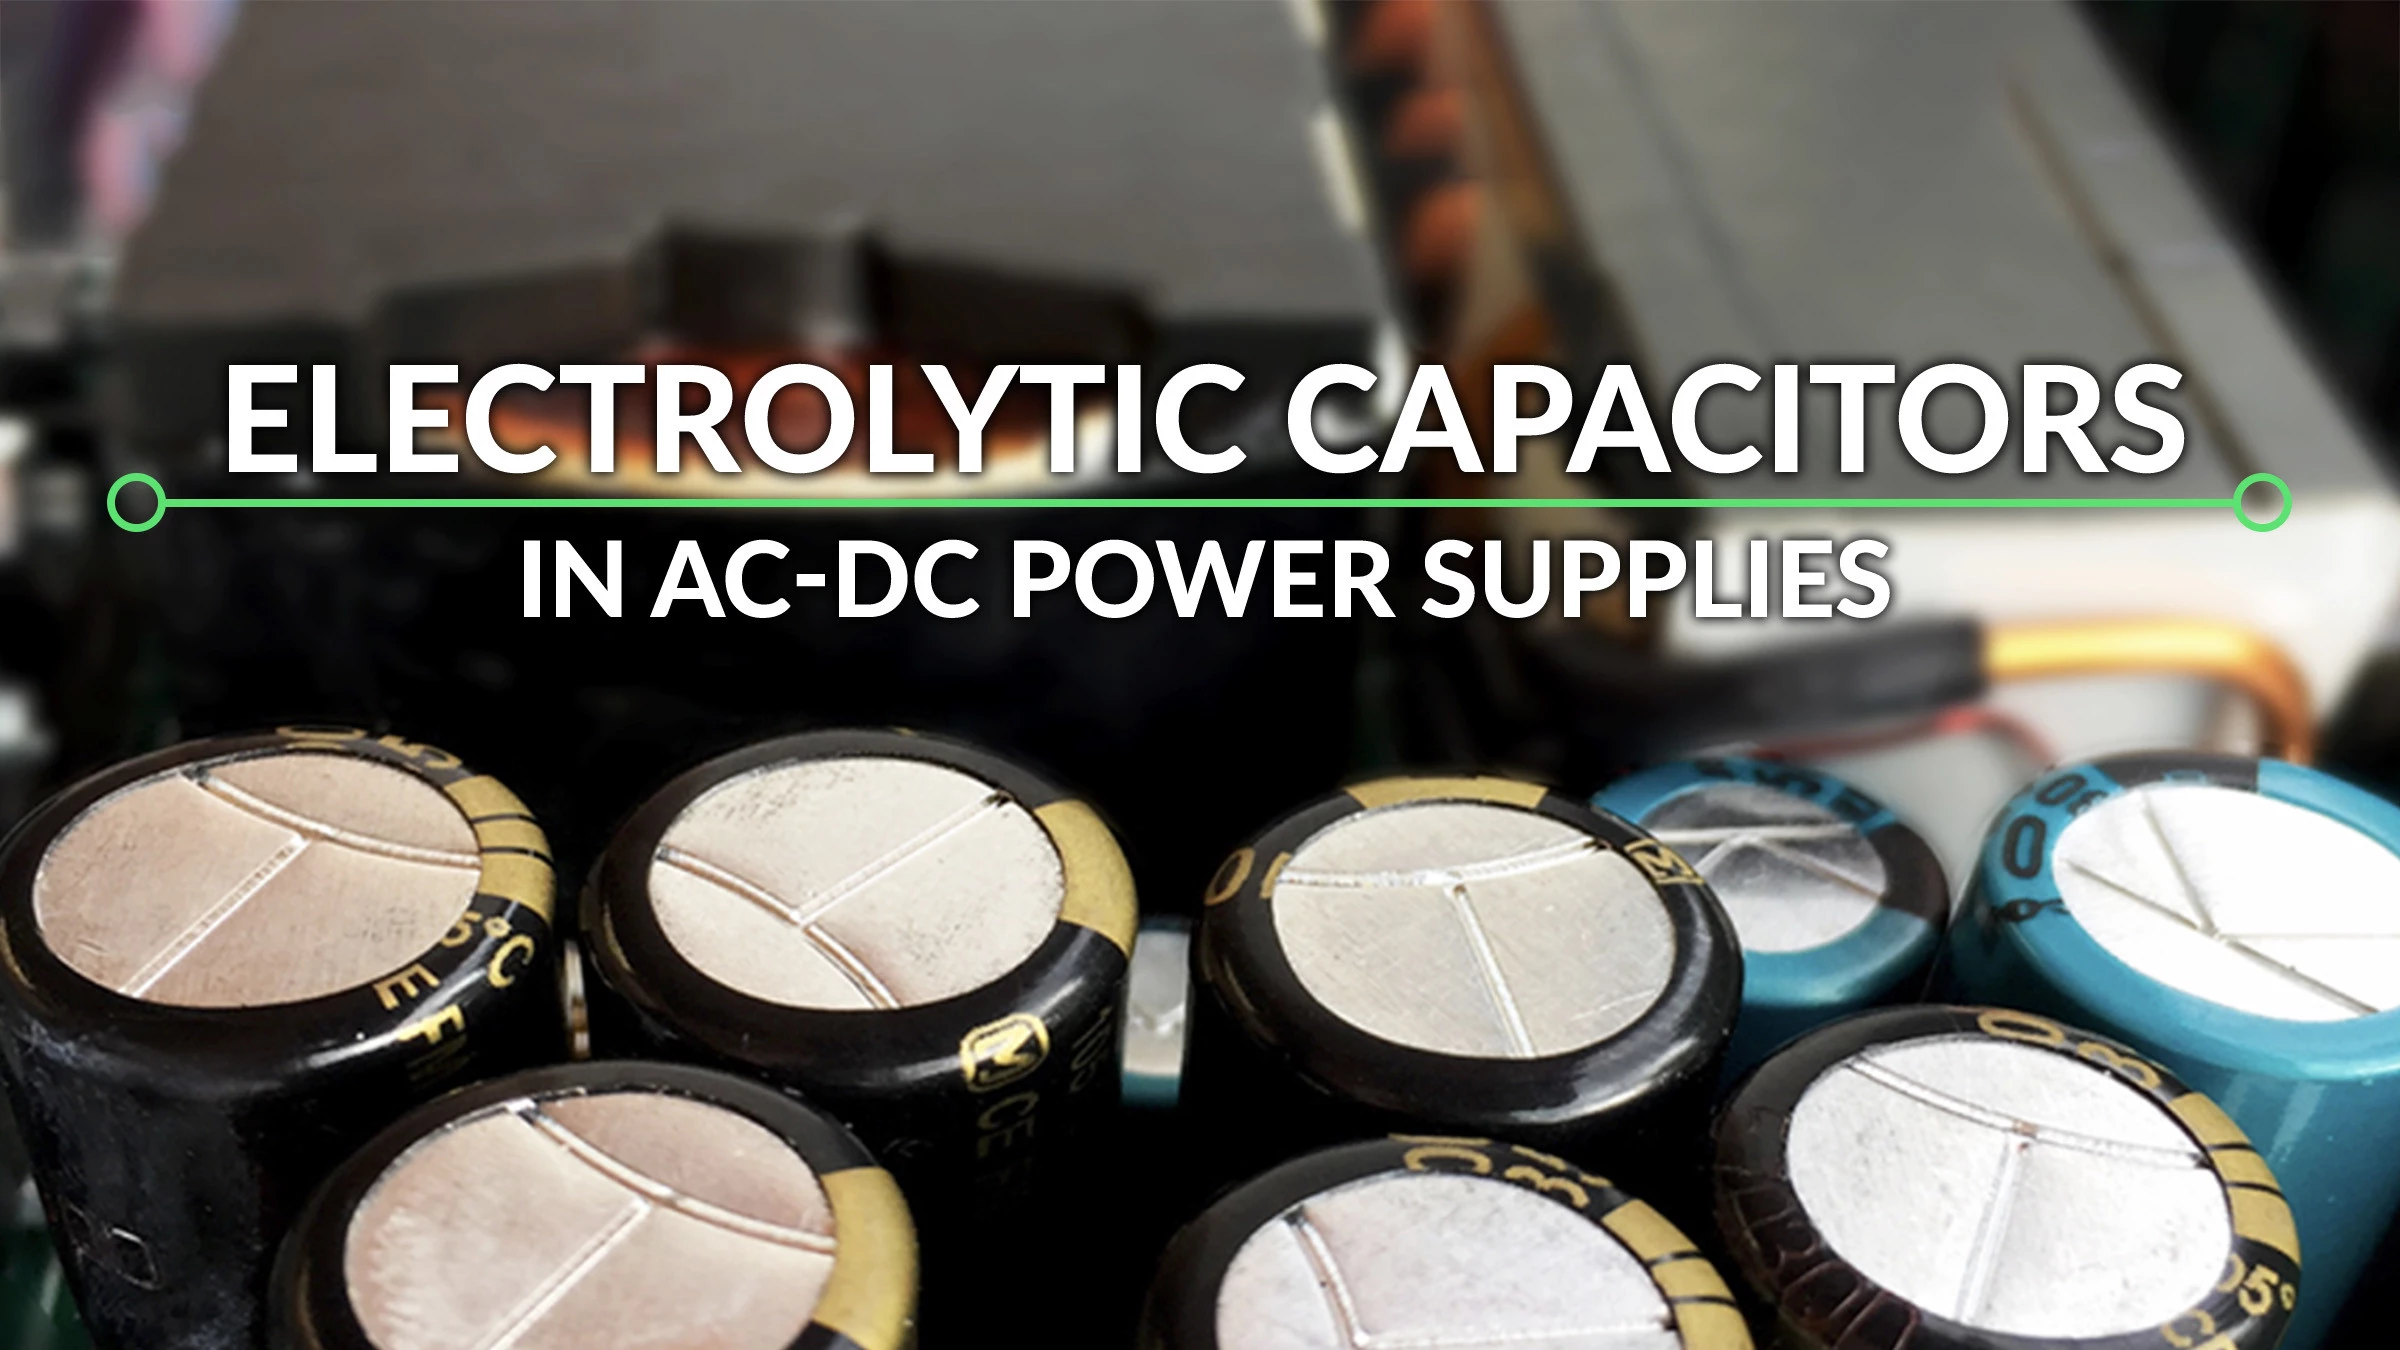 Electrolytic capacitors determine the lifetime of a power supply